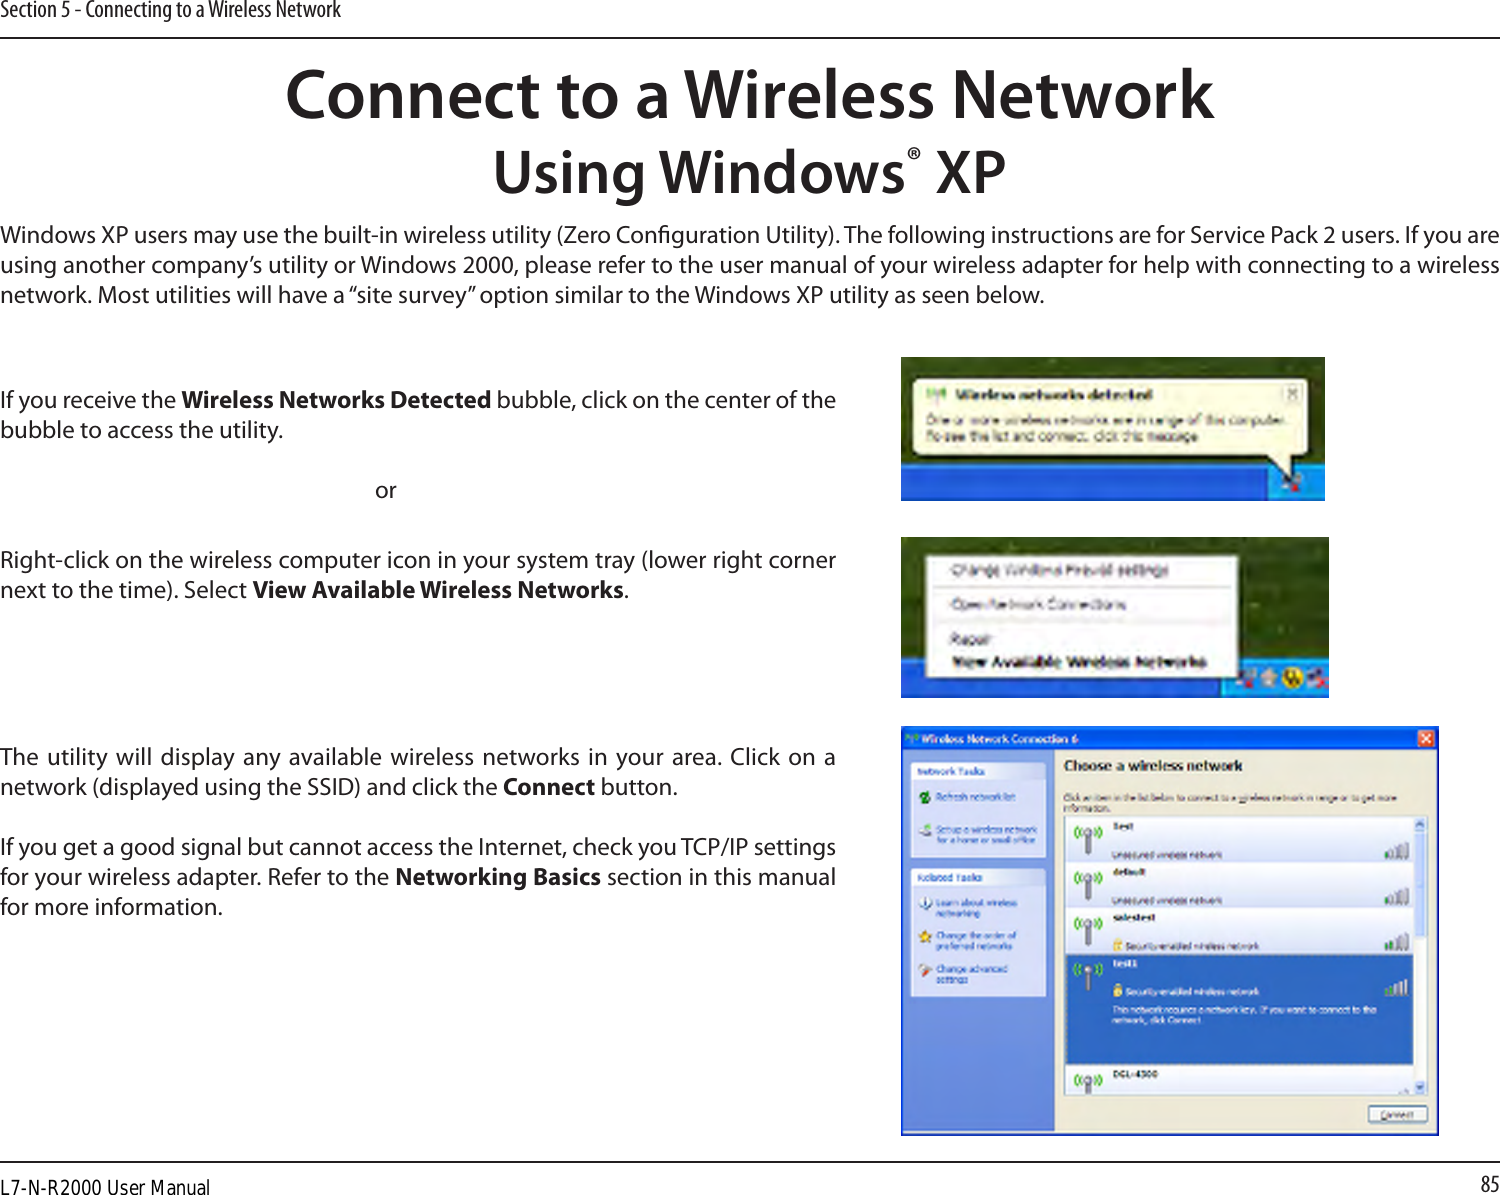 85Section 5 - Connecting to a Wireless NetworkConnect to a Wireless NetworkUsing Windows® XPWindows XP users may use the built-in wireless utility (Zero Conguration Utility). The following instructions are for Service Pack 2 users. If you are using another company’s utility or Windows 2000, please refer to the user manual of your wireless adapter for help with connecting to a wireless network. Most utilities will have a “site survey” option similar to the Windows XP utility as seen below.Right-click on the wireless computer icon in your system tray (lower right corner next to the time). Select View Available Wireless Networks.If you receive the Wireless Networks Detected bubble, click on the center of the bubble to access the utility.     orThe utility  will display any available wireless networks  in your area. Click on a network (displayed using the SSID) and click the Connect button.If you get a good signal but cannot access the Internet, check you TCP/IP settings for your wireless adapter. Refer to the Networking Basics section in this manual for more information.L7-N-R2000 User Manual